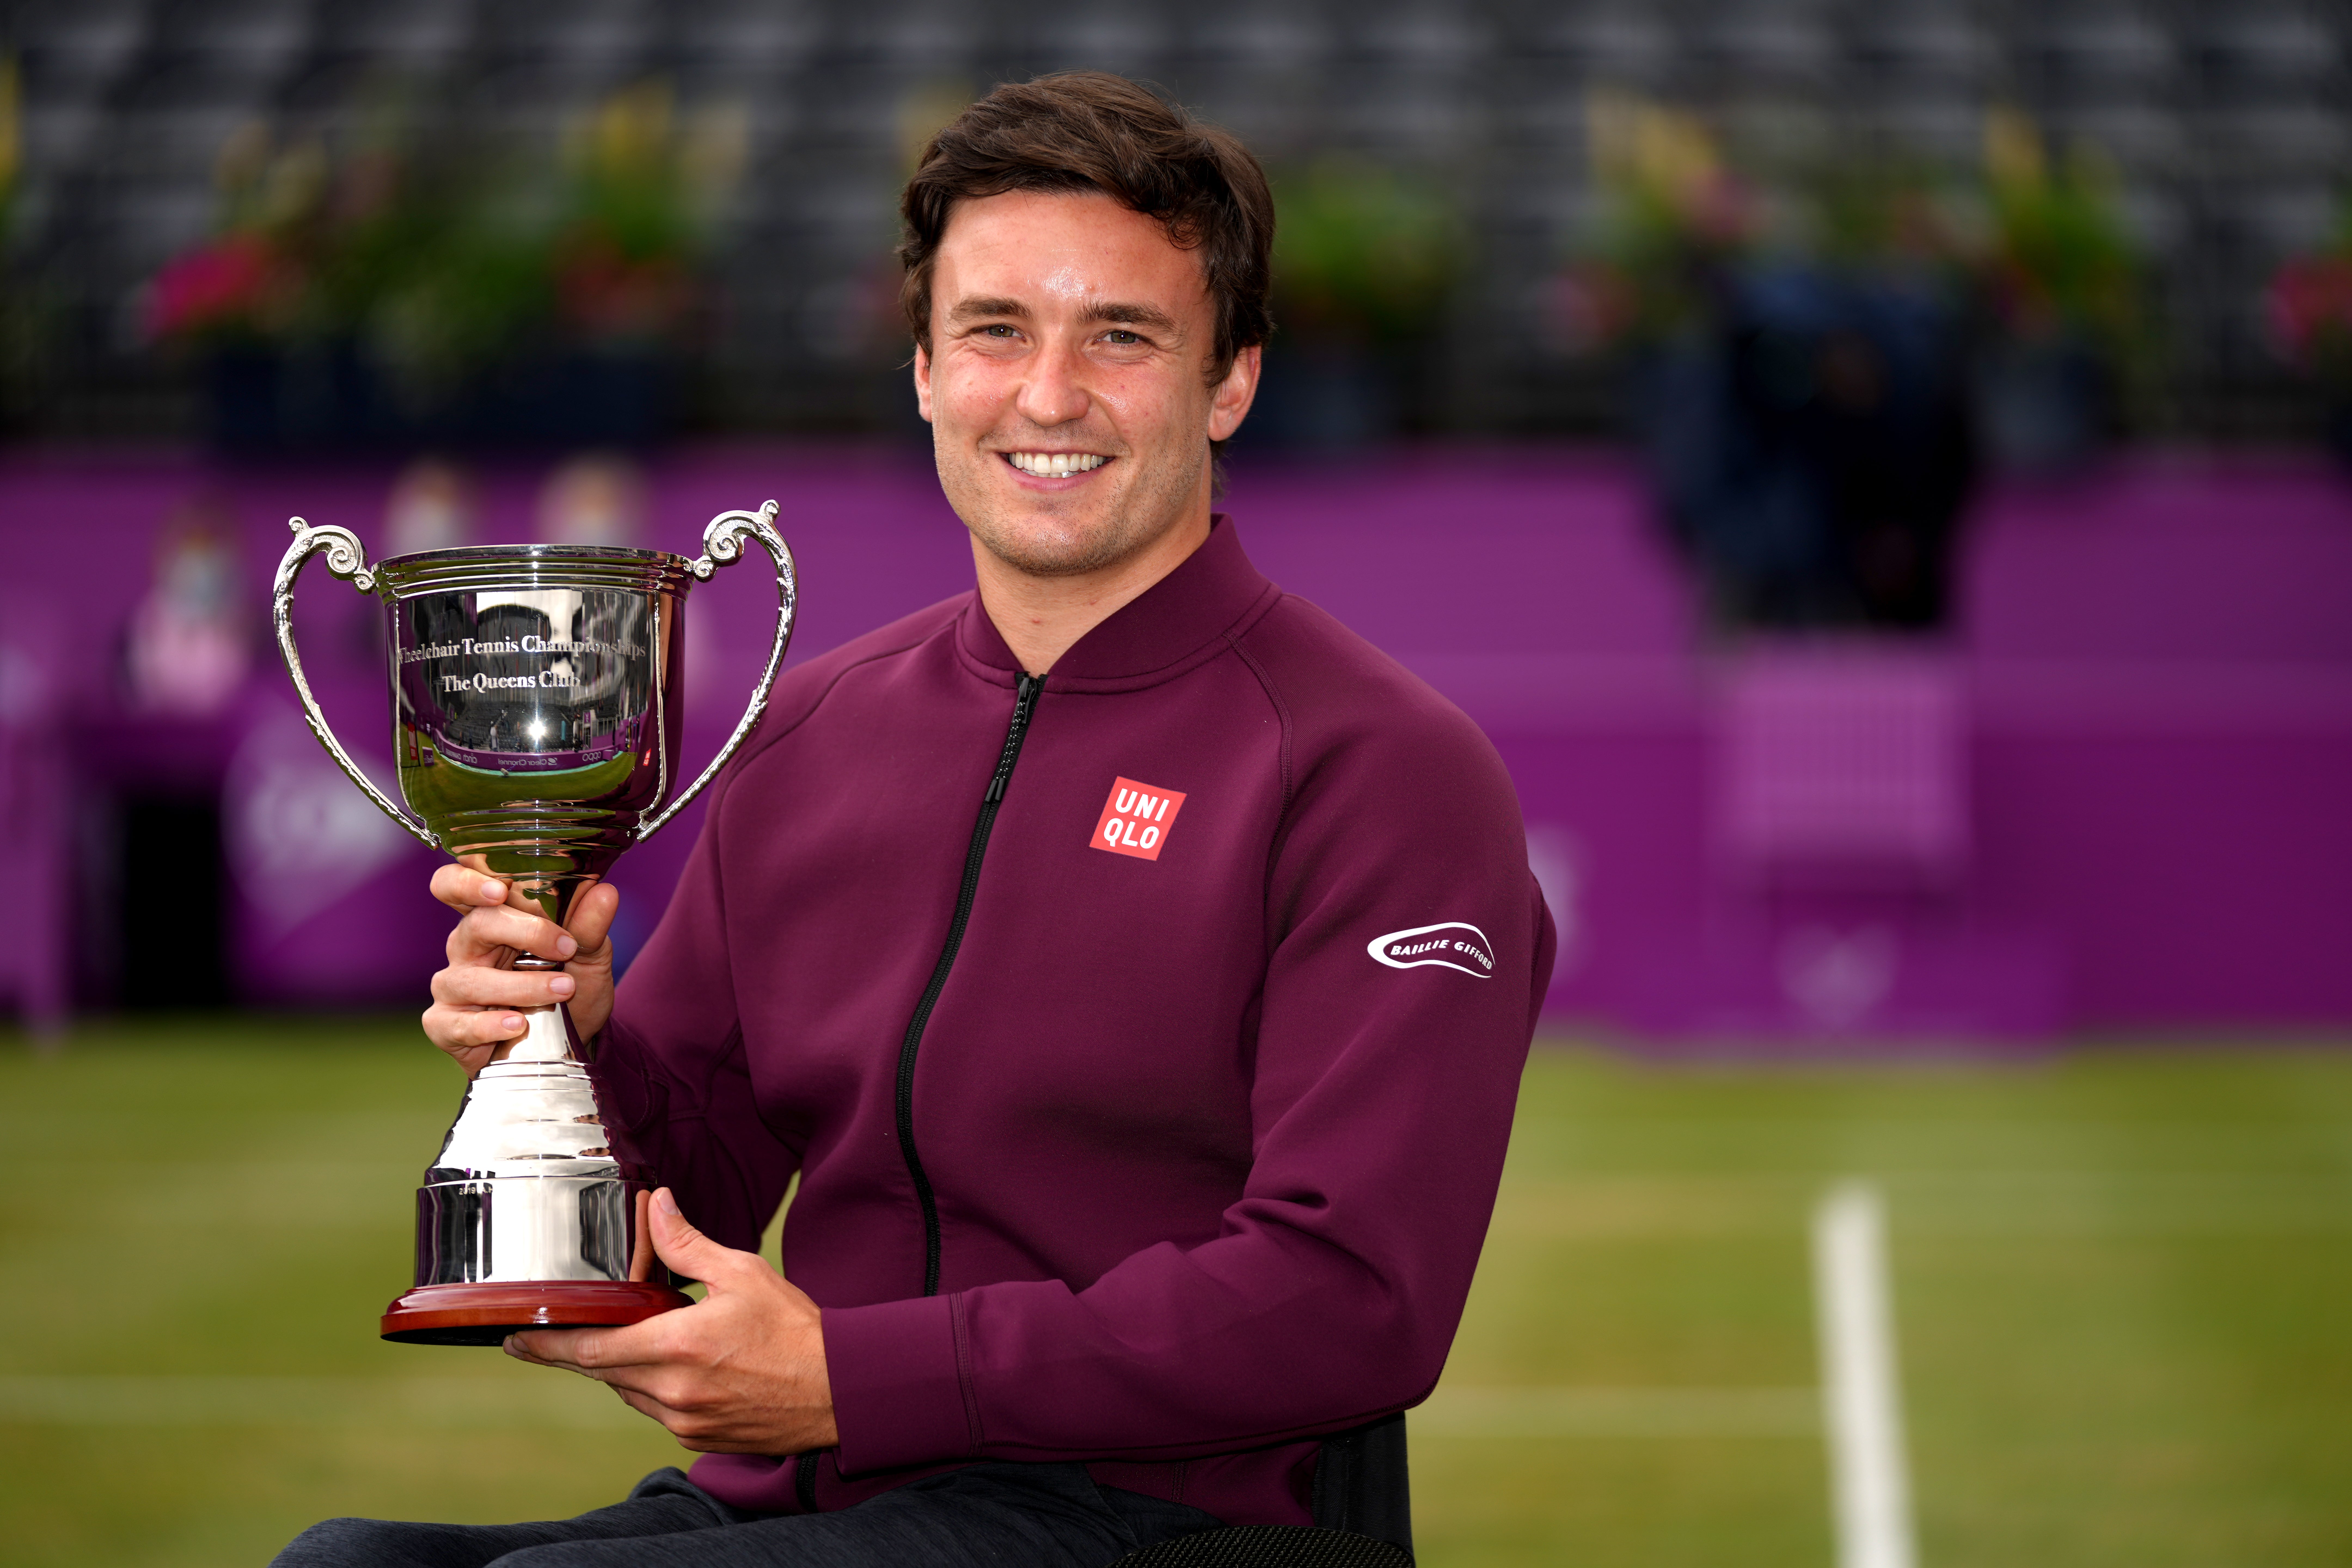 Great Britain’s Gordon Reid won the cinch Championships at The Queen’s Club on Sunday